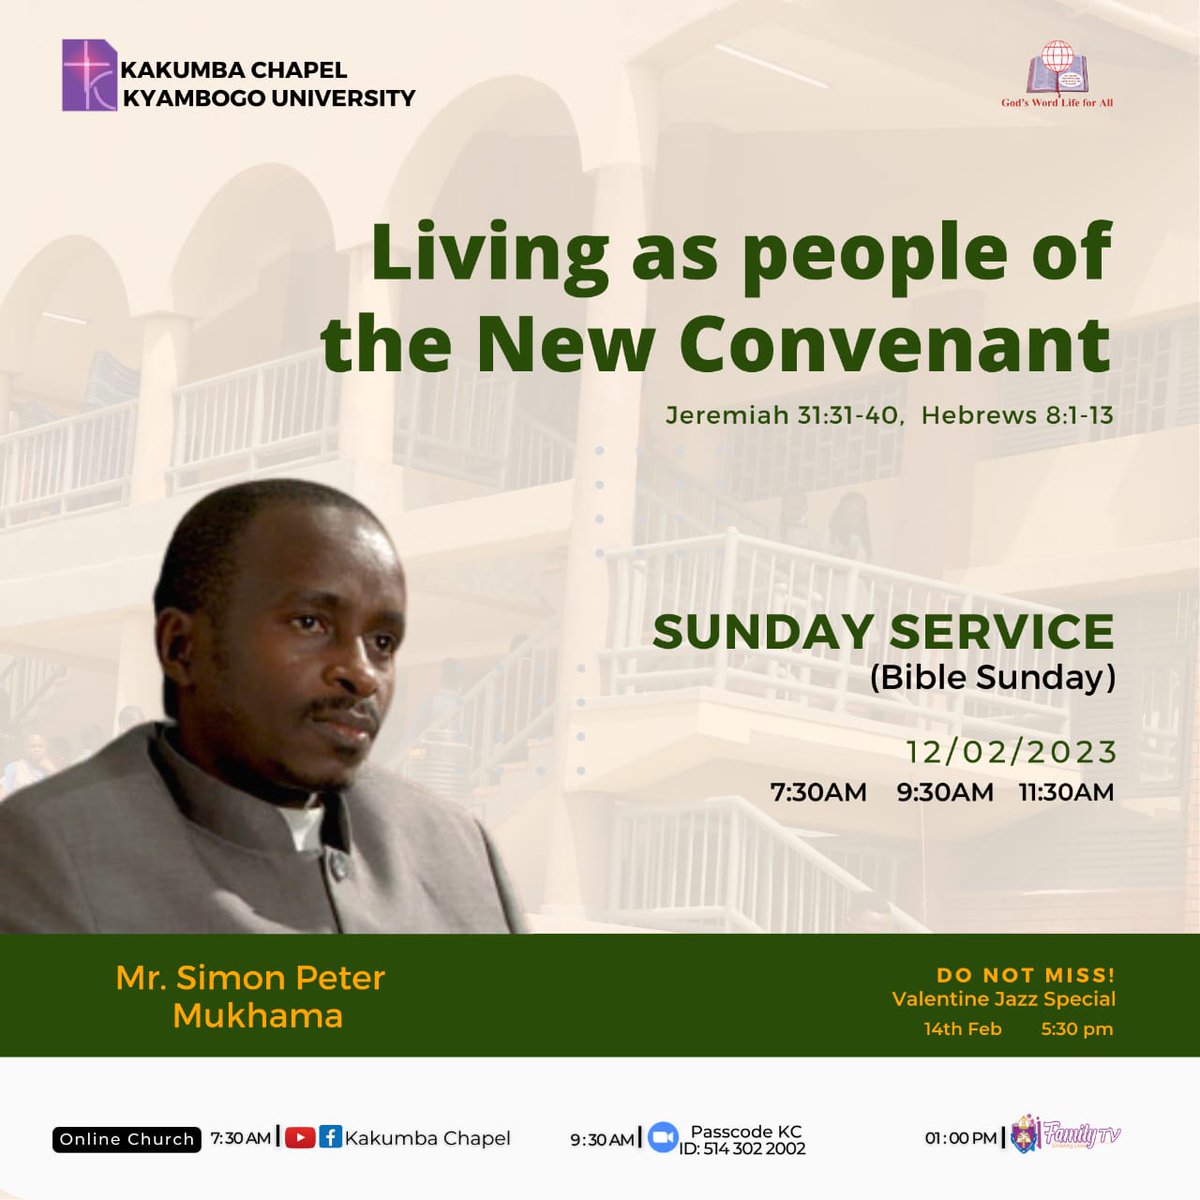 BIBLE SUNDAY Topic: Living as People of the New Covenant. ( Jer 31:31-40, Heb 8:1-13) Preacher: Mr. Simon Peter Mukhama Here is another opportunity to support the work of Bible society of Uganda in all services, Purpose to set a side a contribution towards this Cause, Blessings